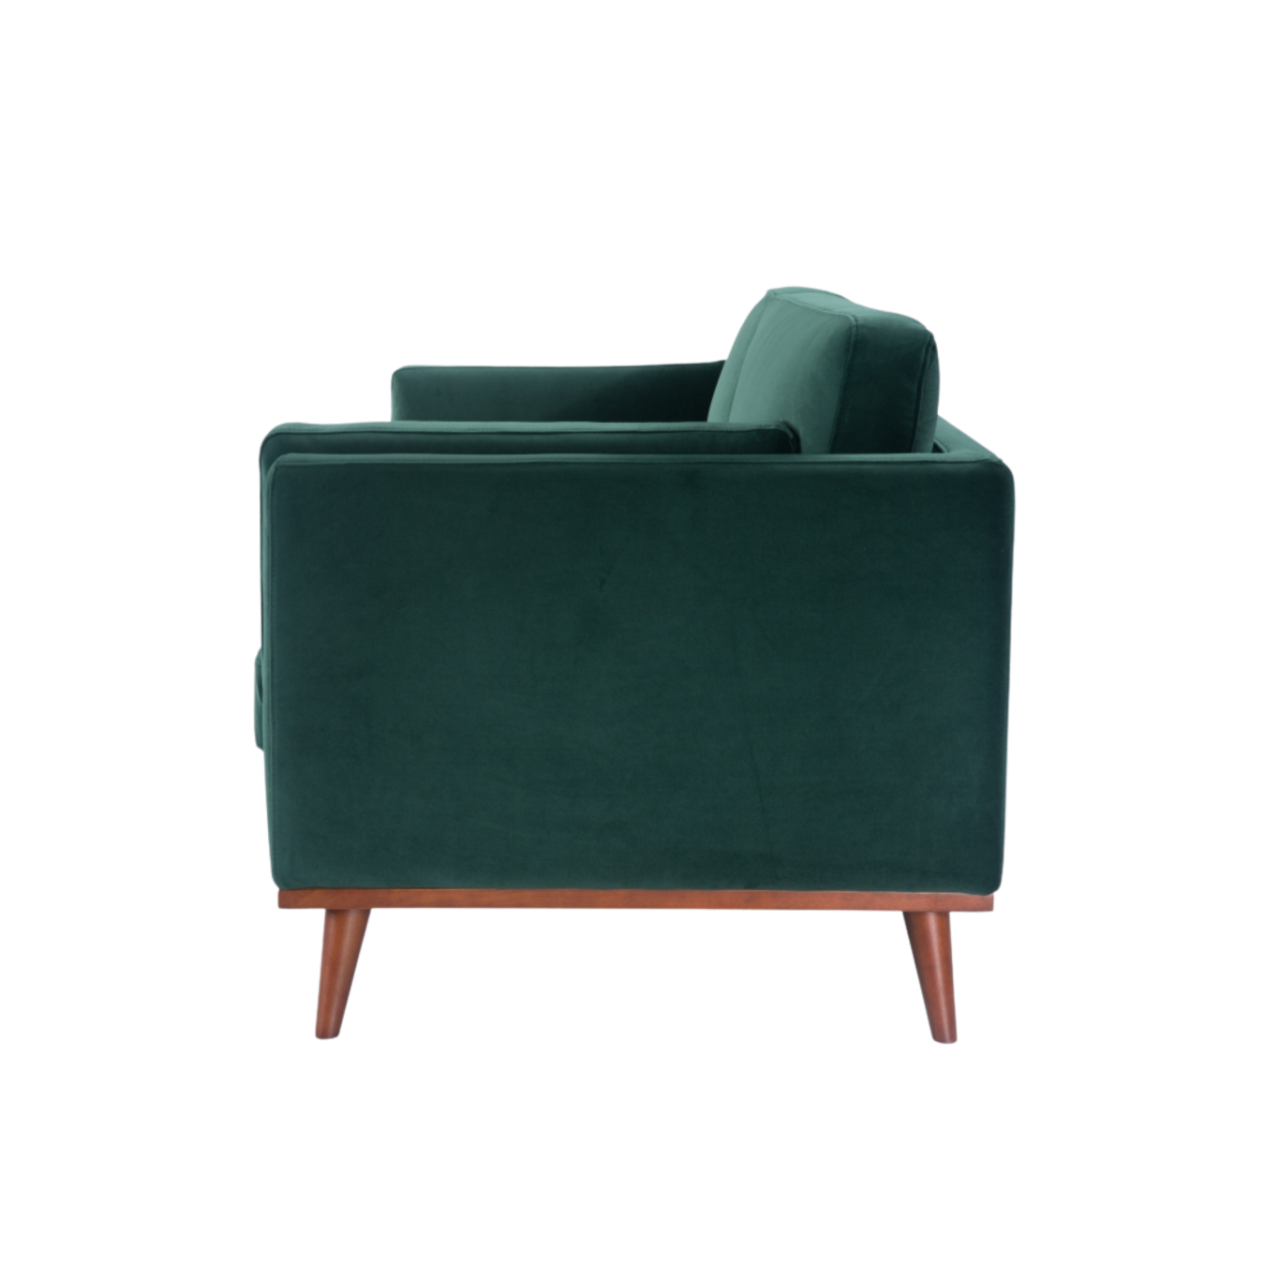 side view of detail of Simple, modern shaped 2 seater sofa in emerald green velvet upholstery